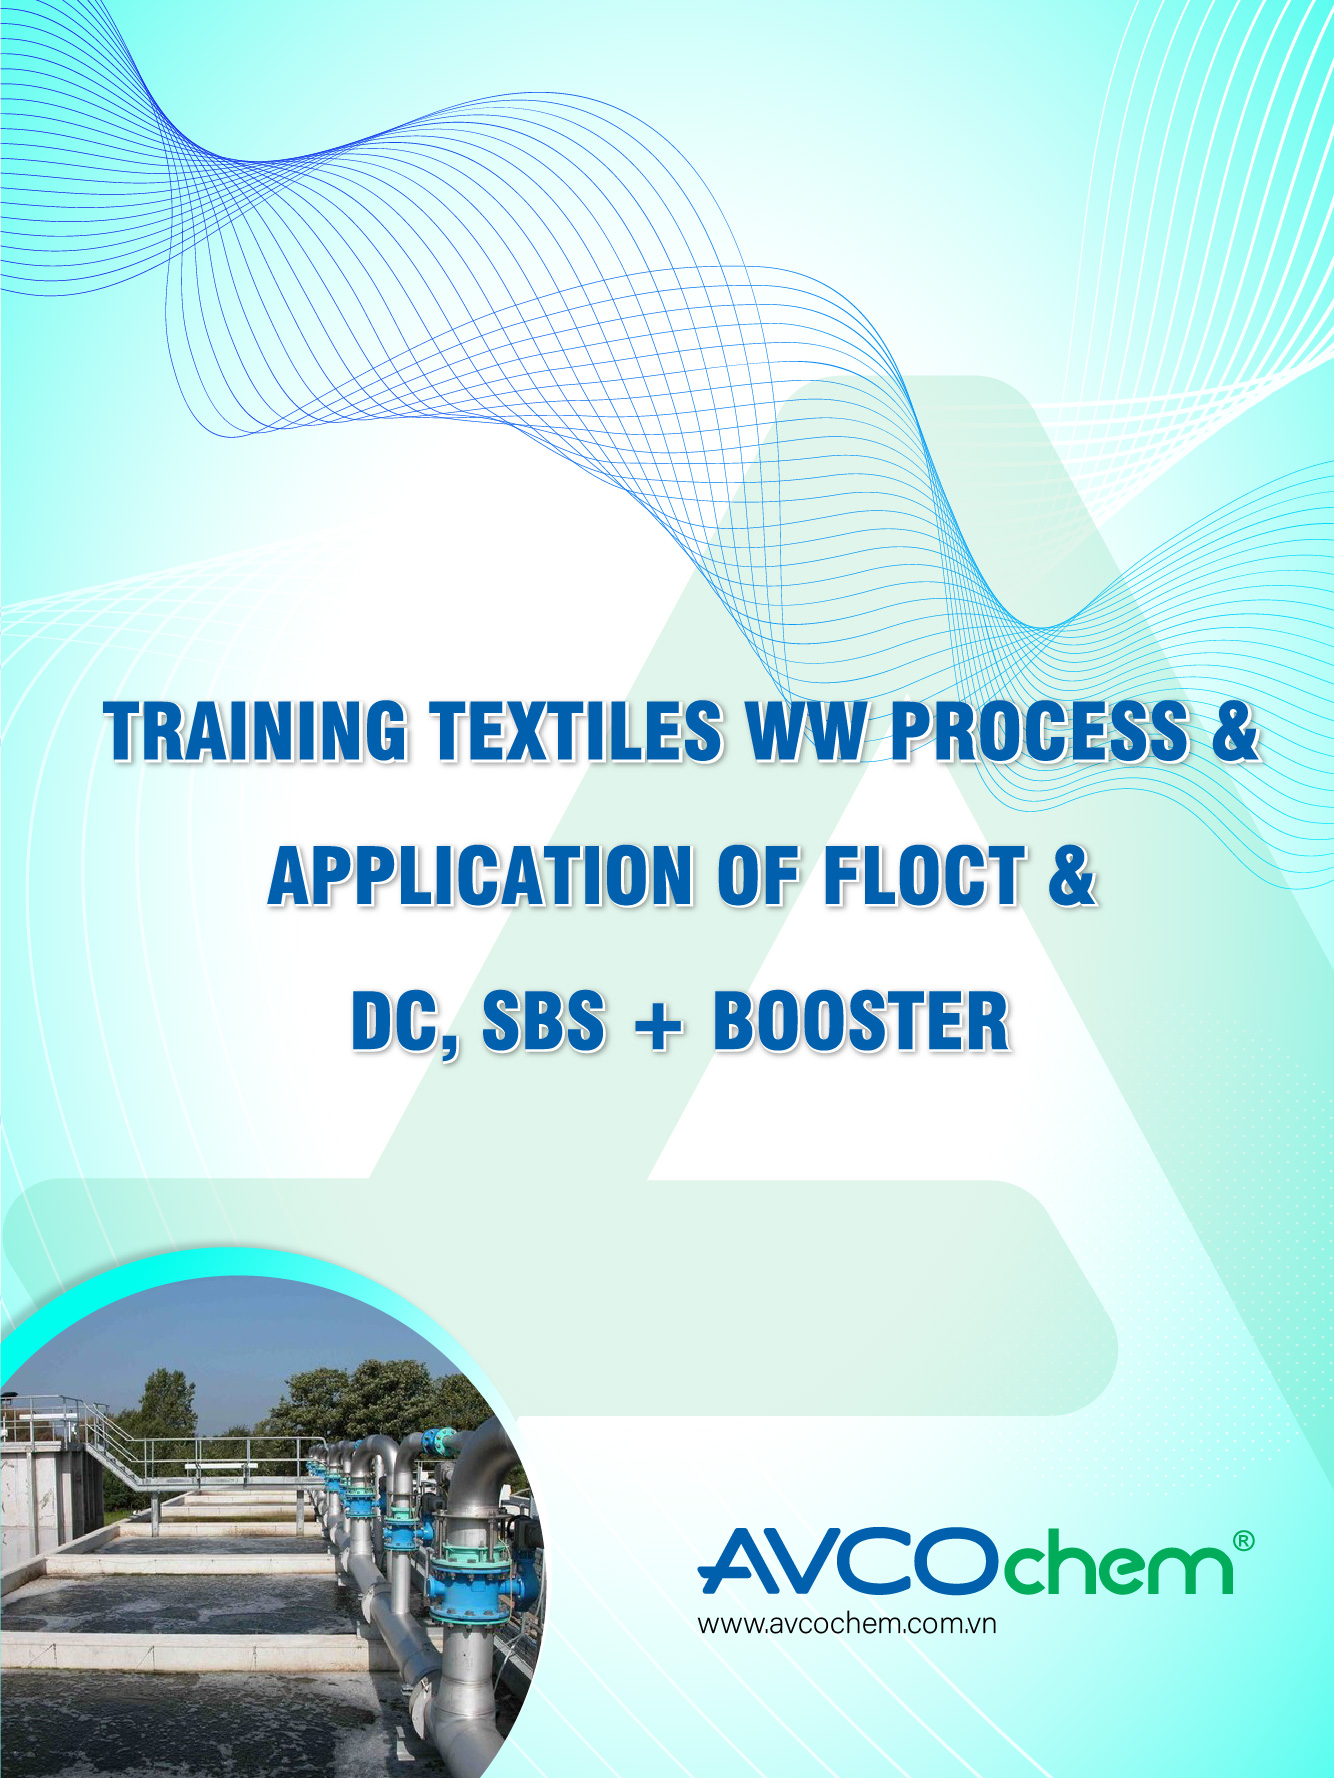 TRAINING TEXTILES WW PROCESS & APPLICATION OF FLOCT & DC, SBS AND BOOSTER